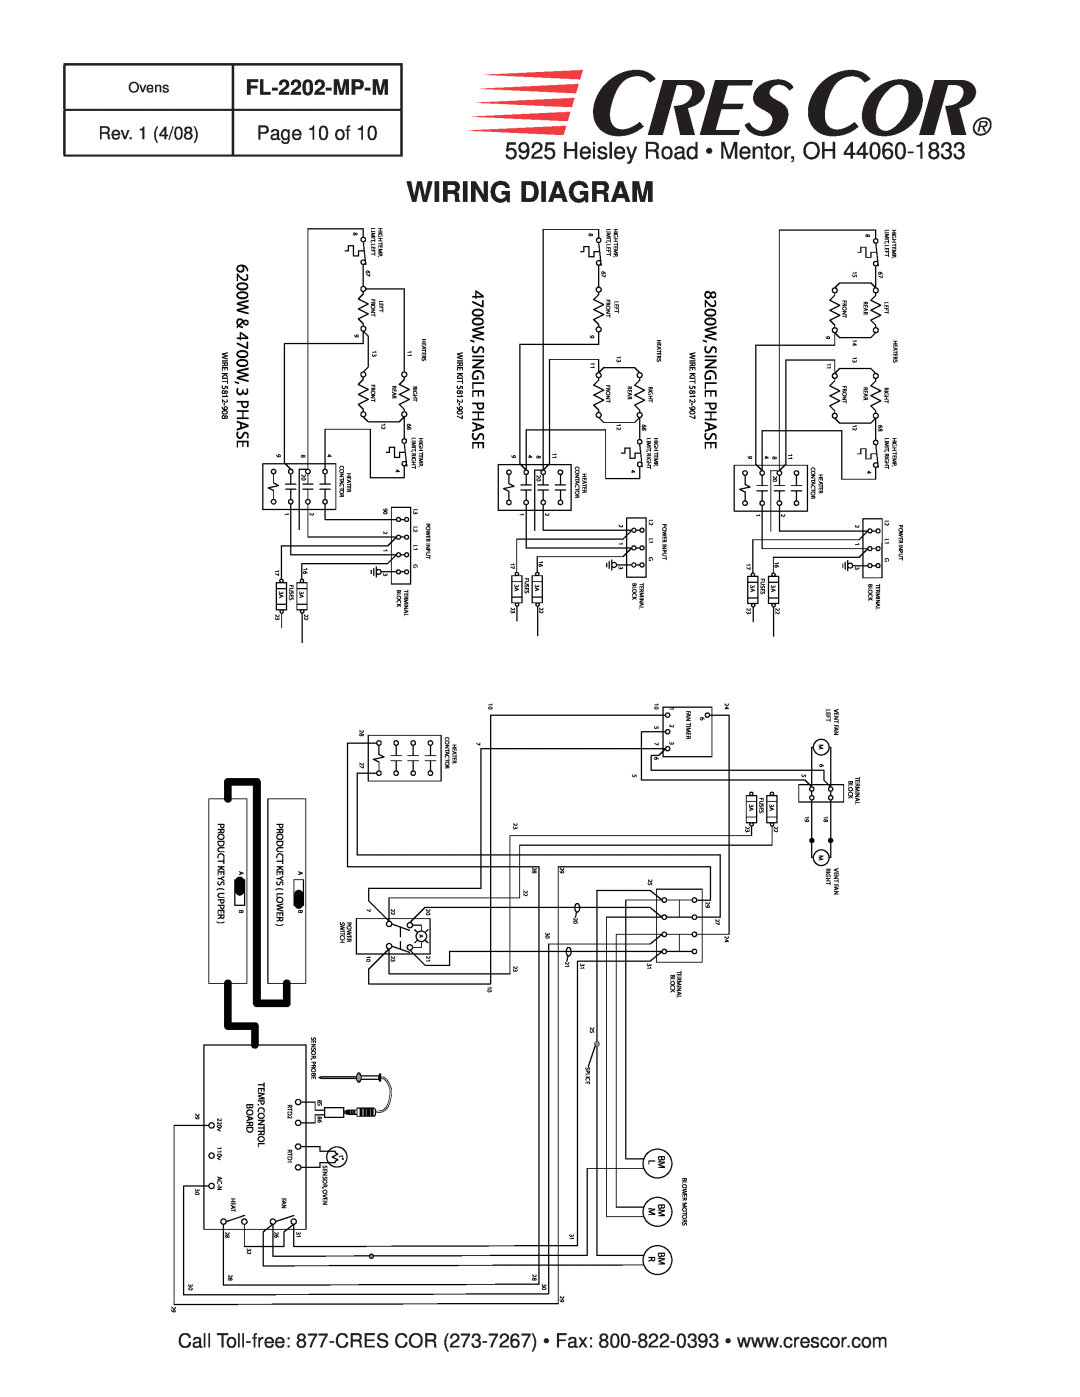 Cres Cor RO151FUA18 Heisley Road Mentor, OH 44060-1833 WIRING DIAGRAM, Mp-M, FL-2202, Page, Rev. 1 4/08, Wire Kit, Board 